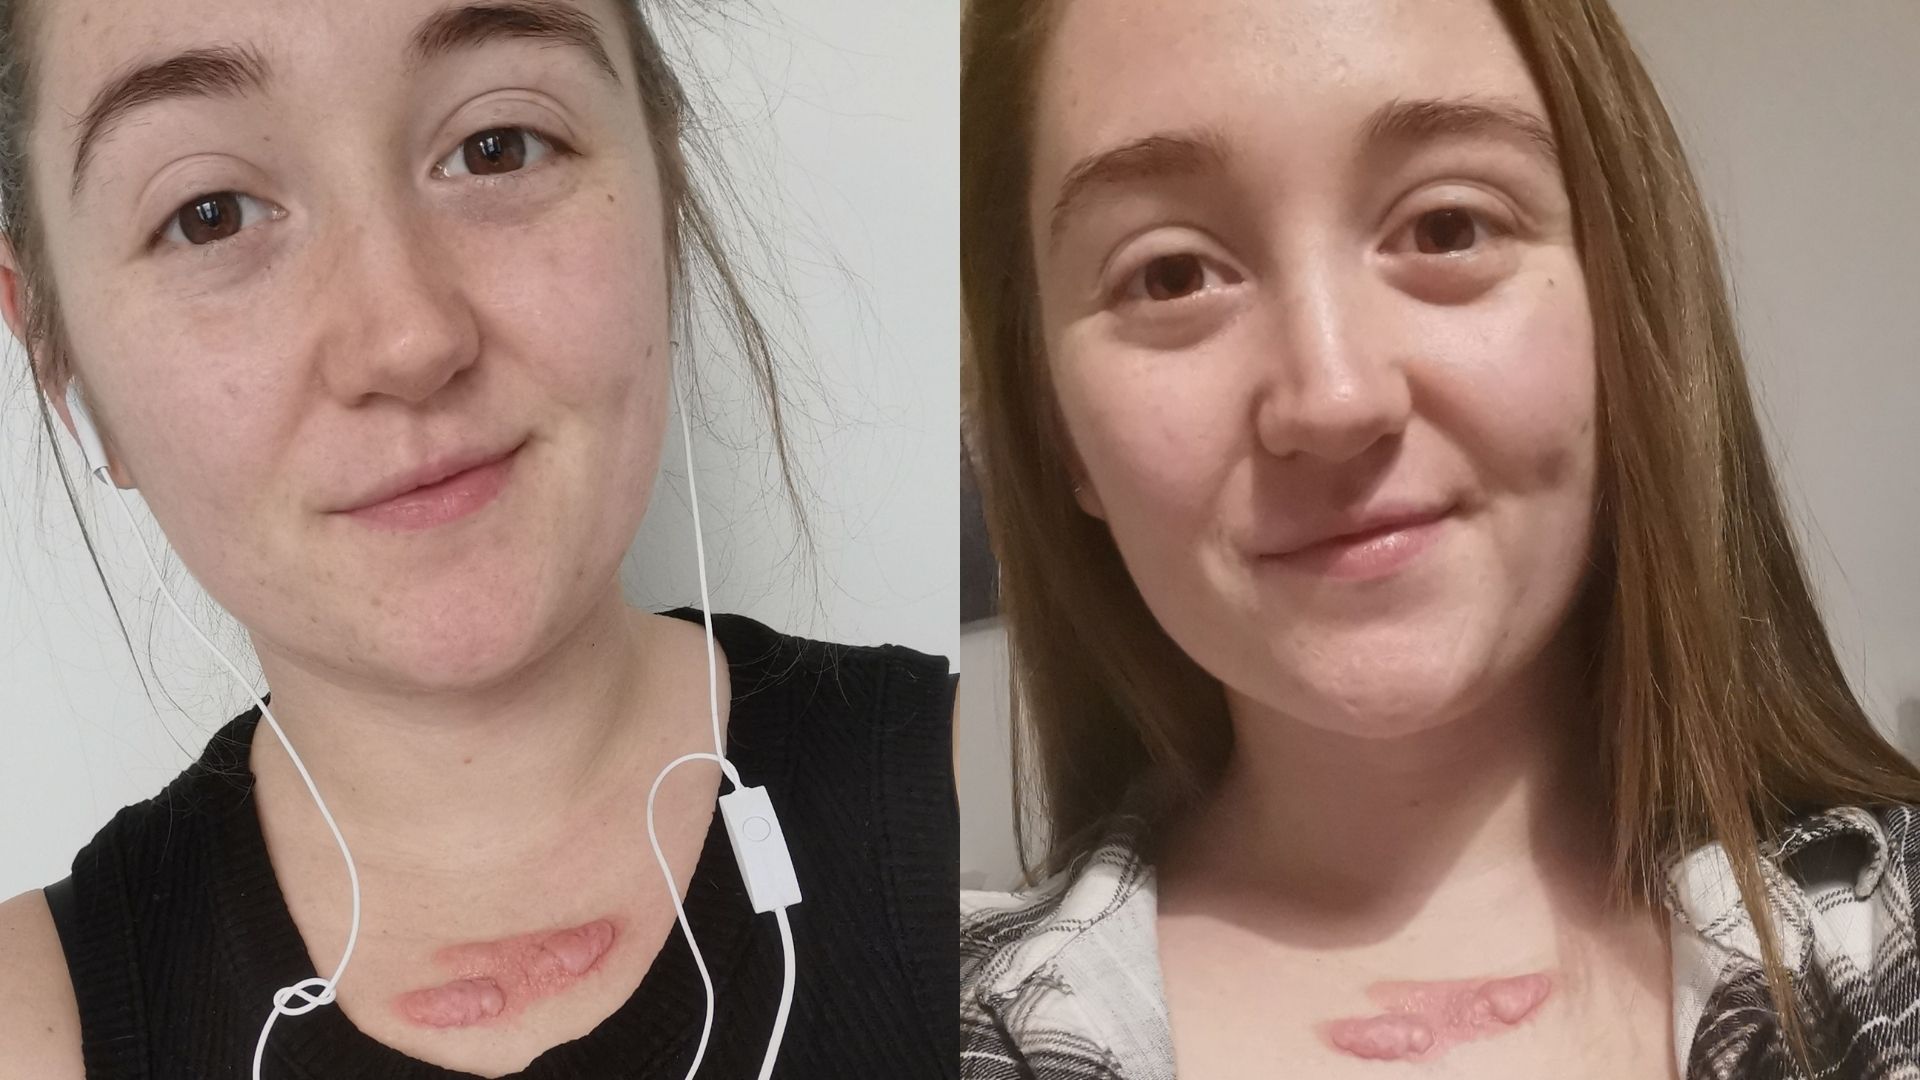 Left: Chloe, a white woman in her early 20s who's wearing a black tank top and air pods. She has keloid scars. Right: Chloe, wearing a check shirt.